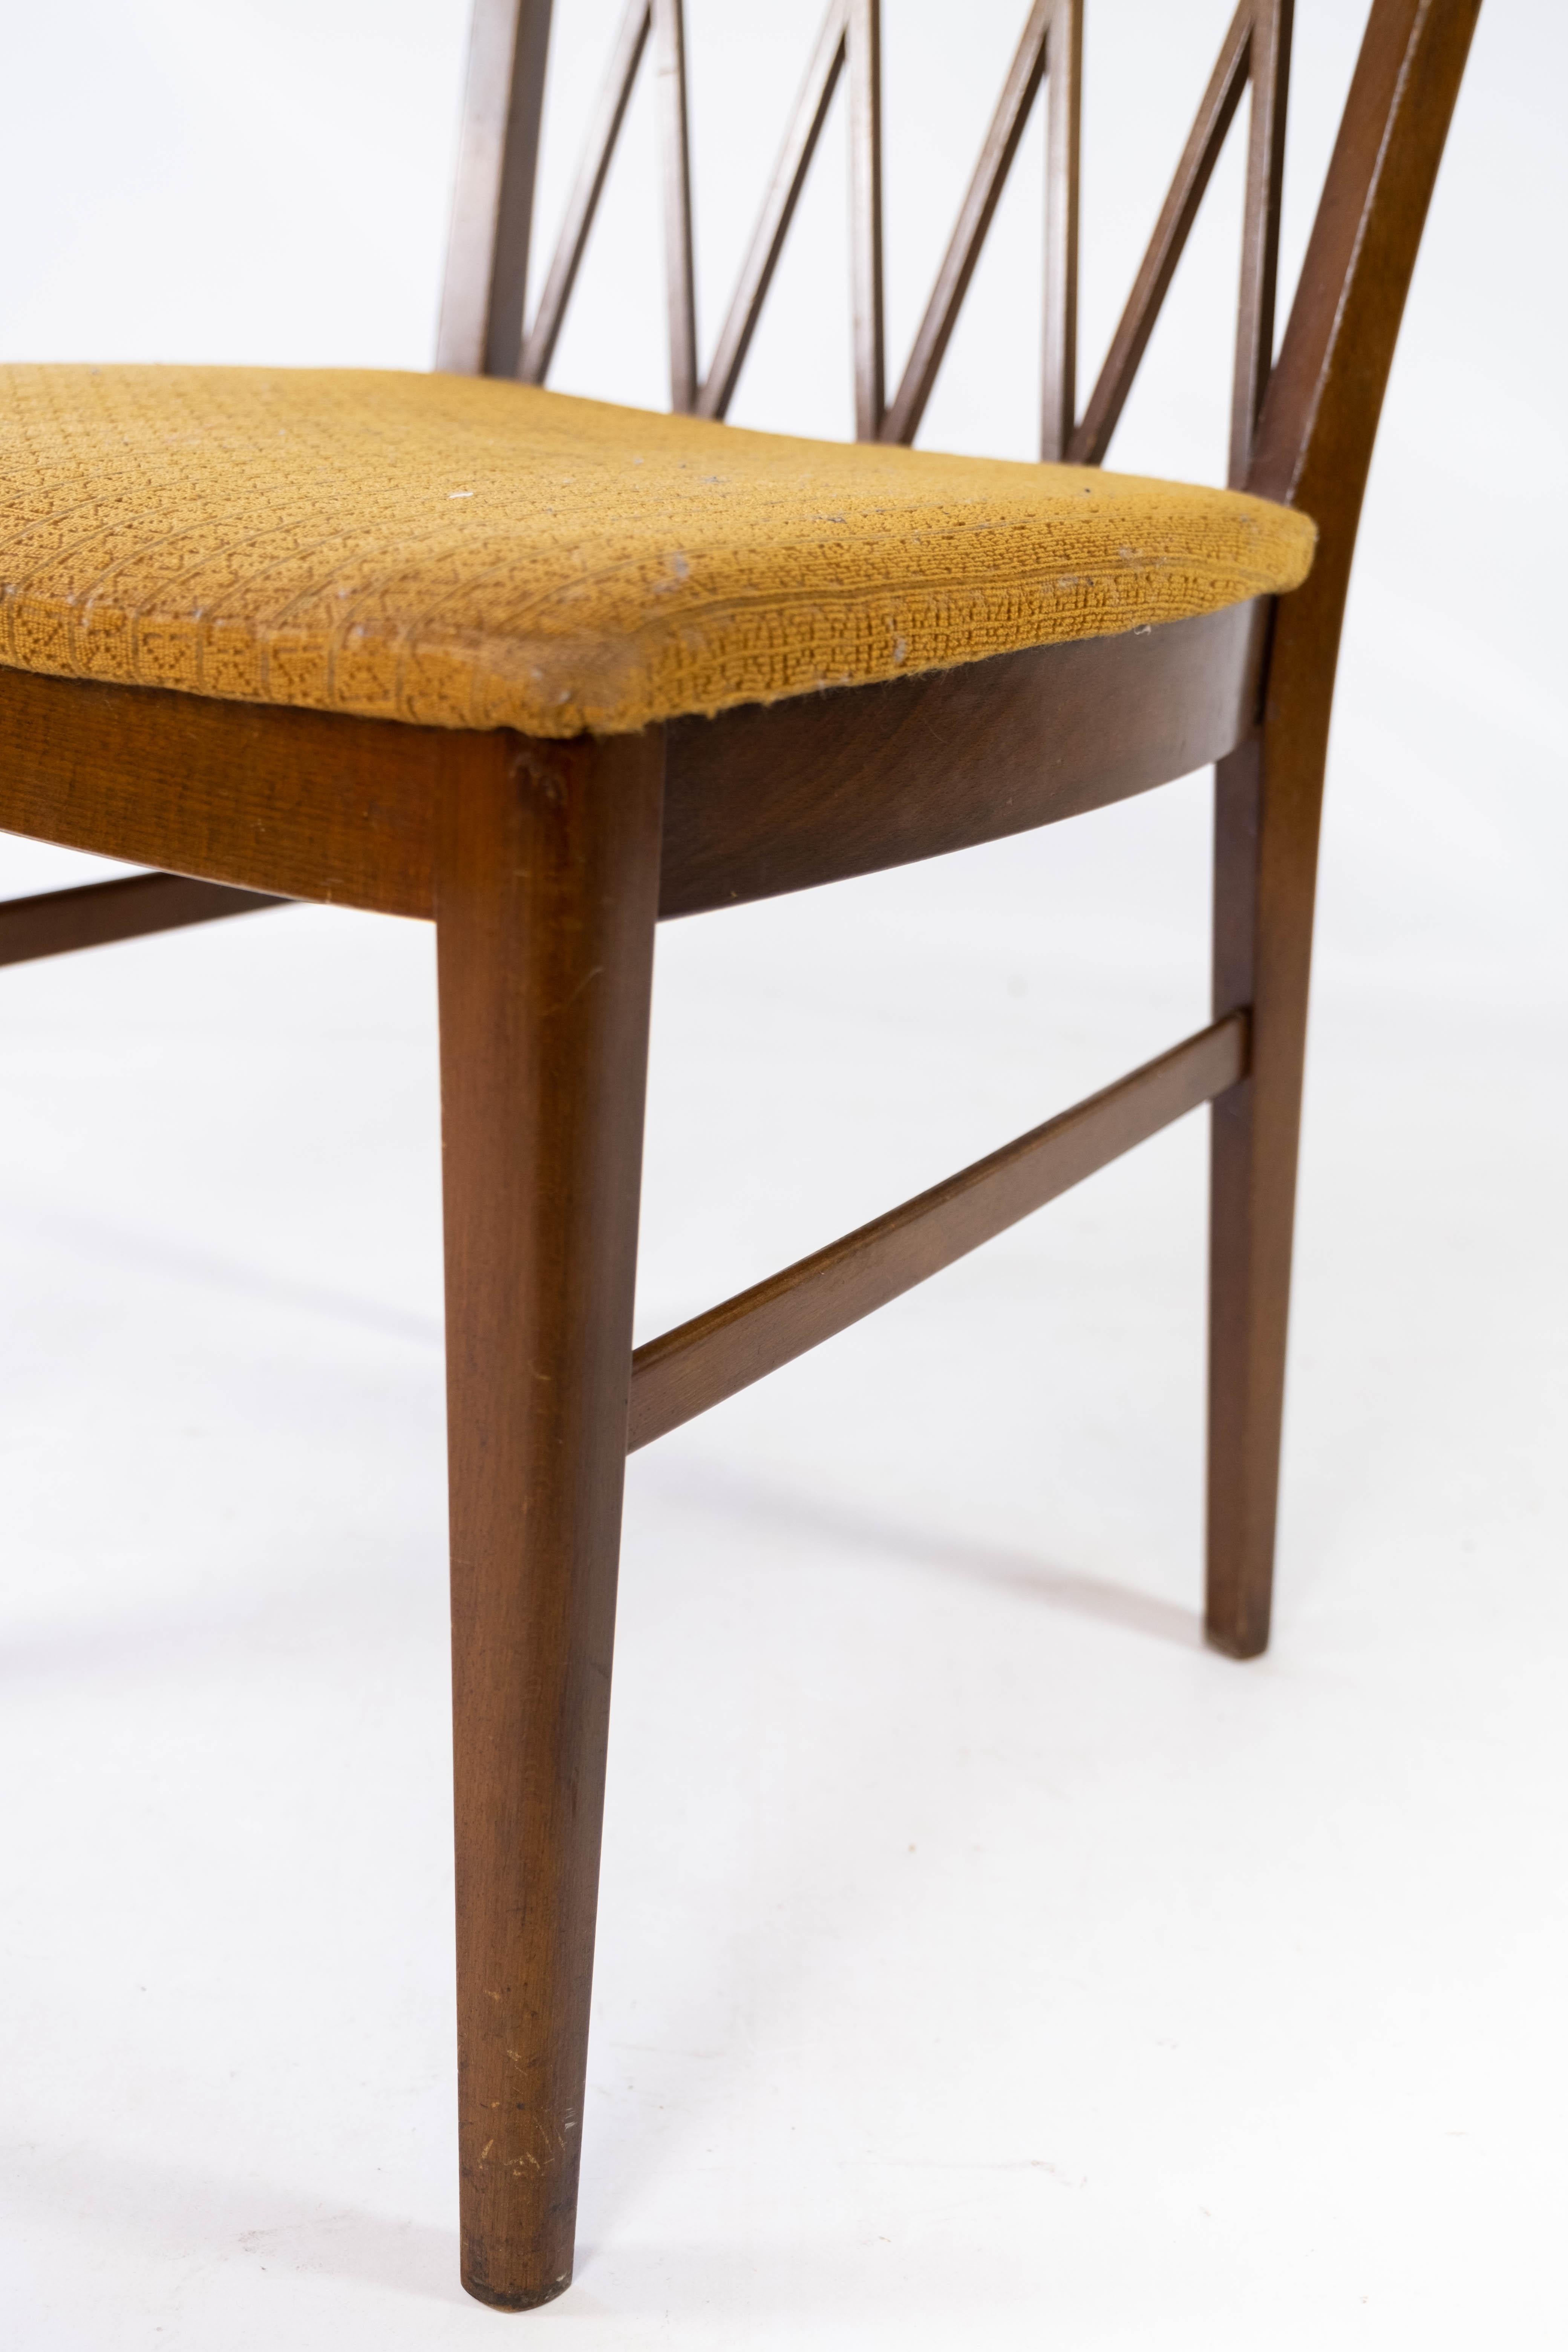 Set of Dining Room Chairs of Walnut and Upholstered with Dark Fabric, 1940s For Sale 1